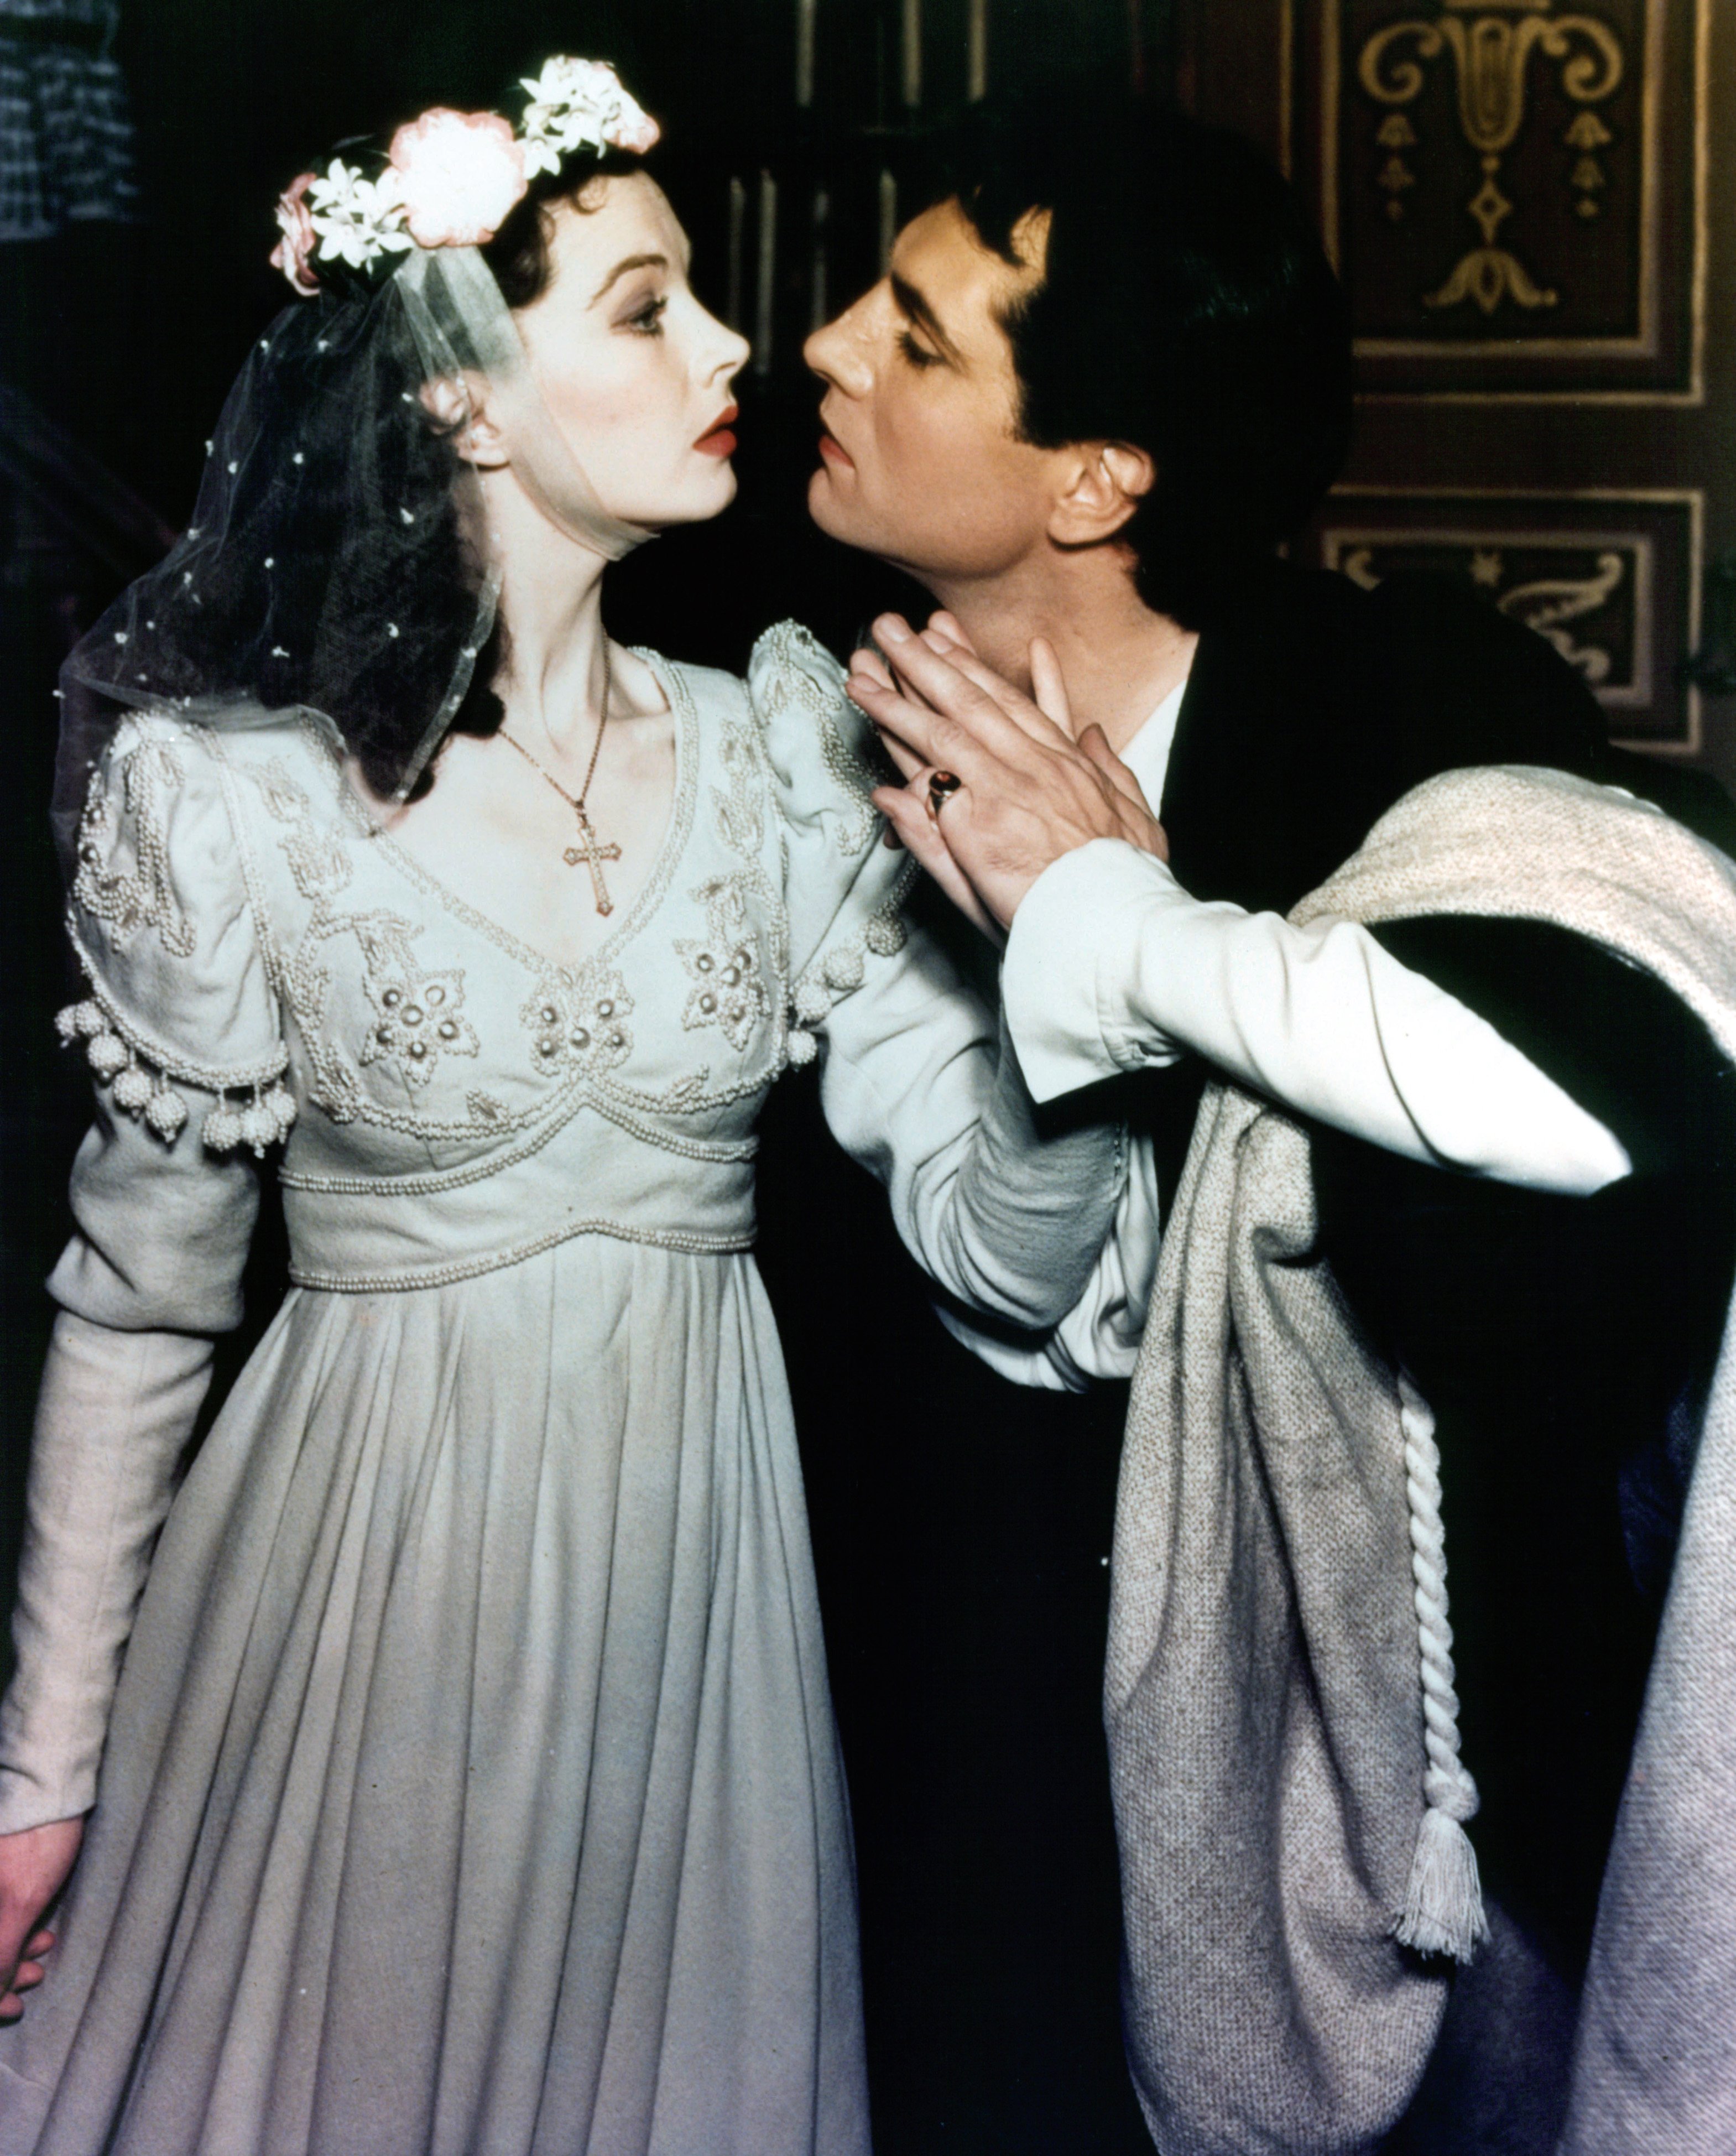 Pictured: Vivien Leigh about to kiss Laurence Olivier in a scene from a stage production of "Romeo and Juliet" in 1940 | Photo: Getty Images